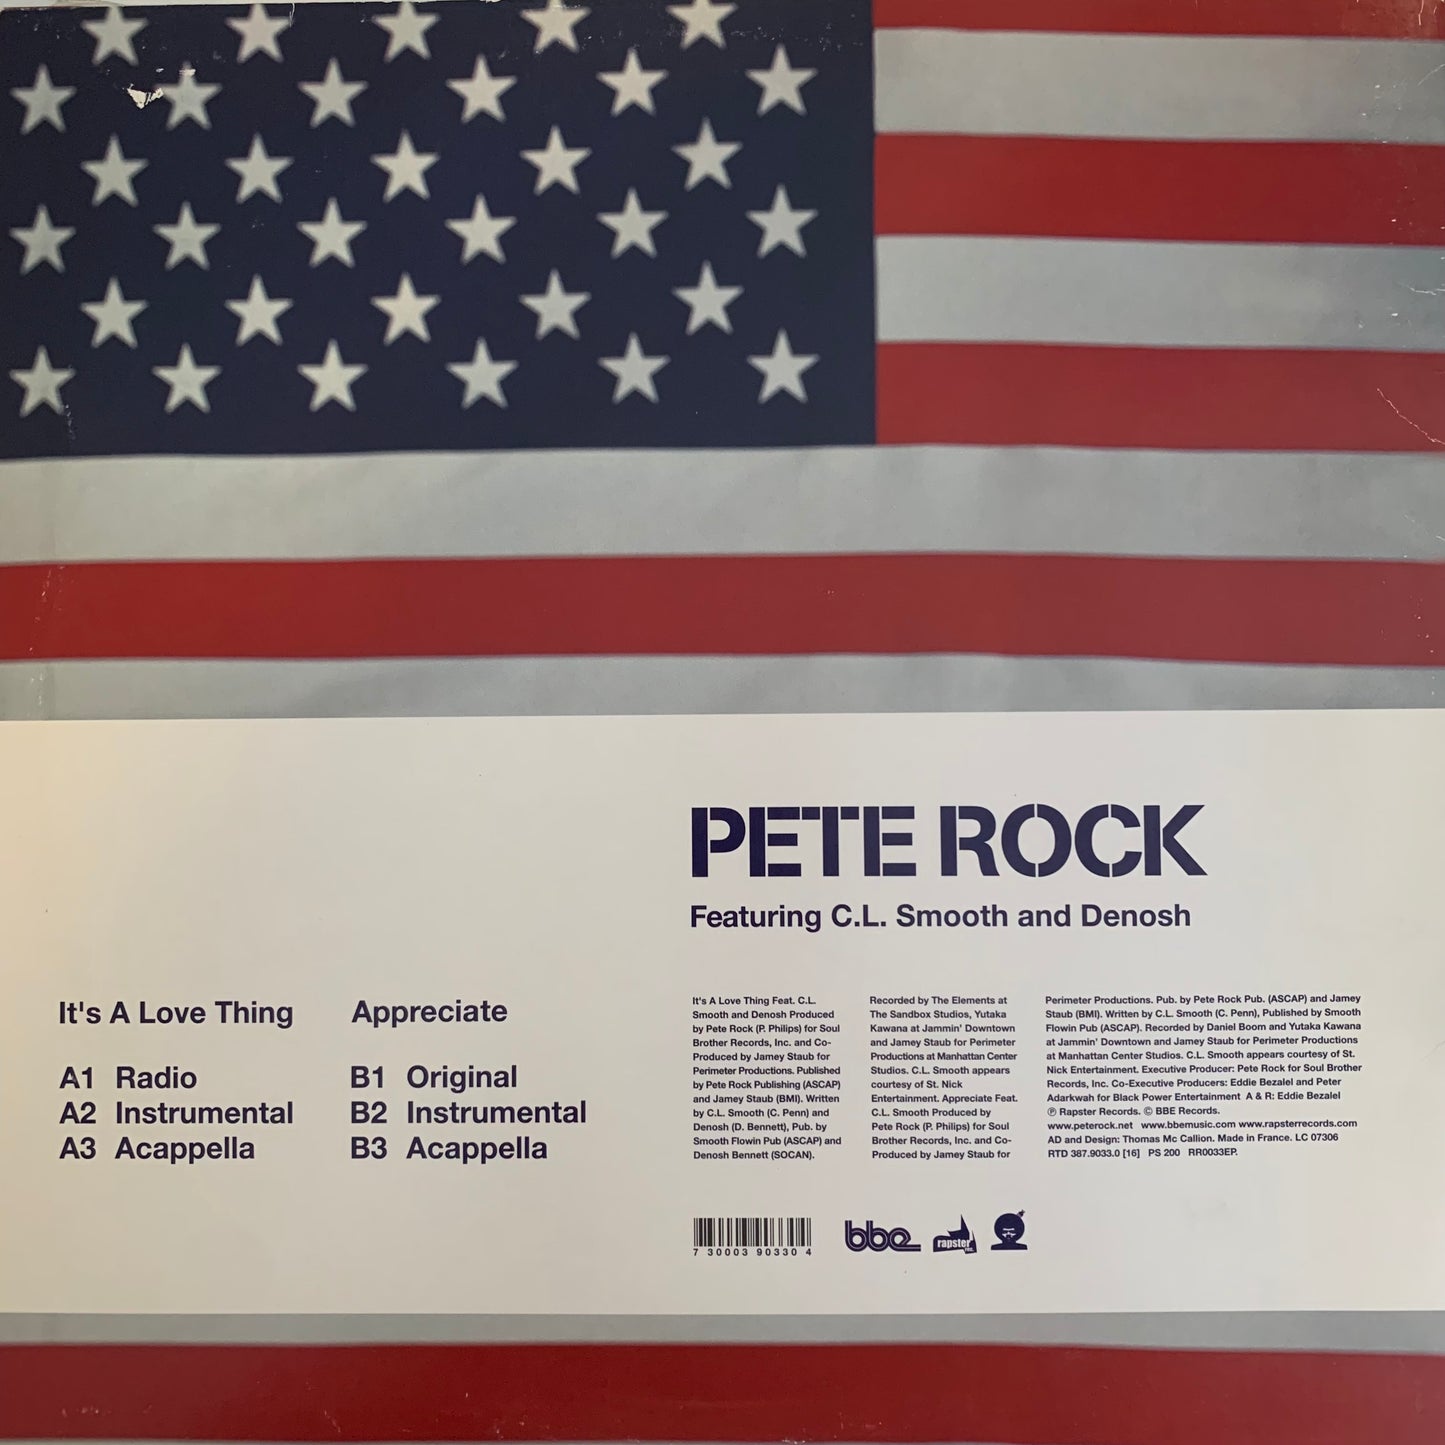 Pete Rock Feat CL Smooth “It’s A Love Thing” 6 Version 12inch Vinyl Single full Track Listing In Photos